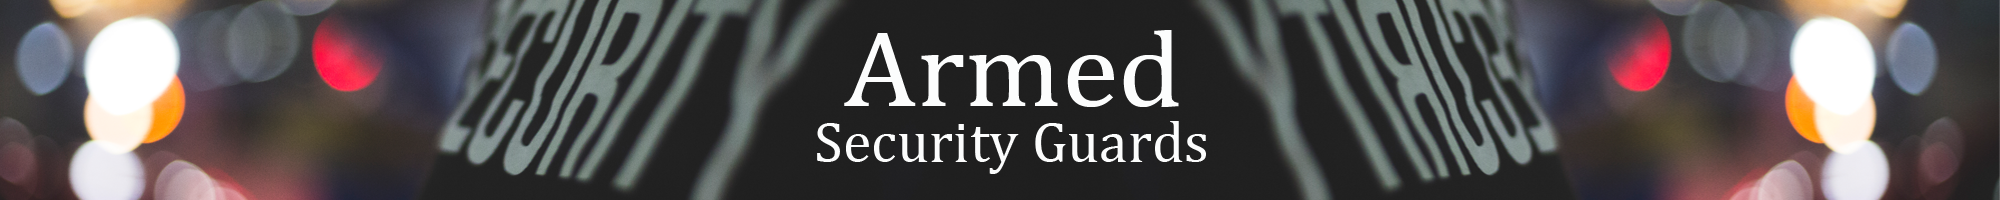 Armed Guards